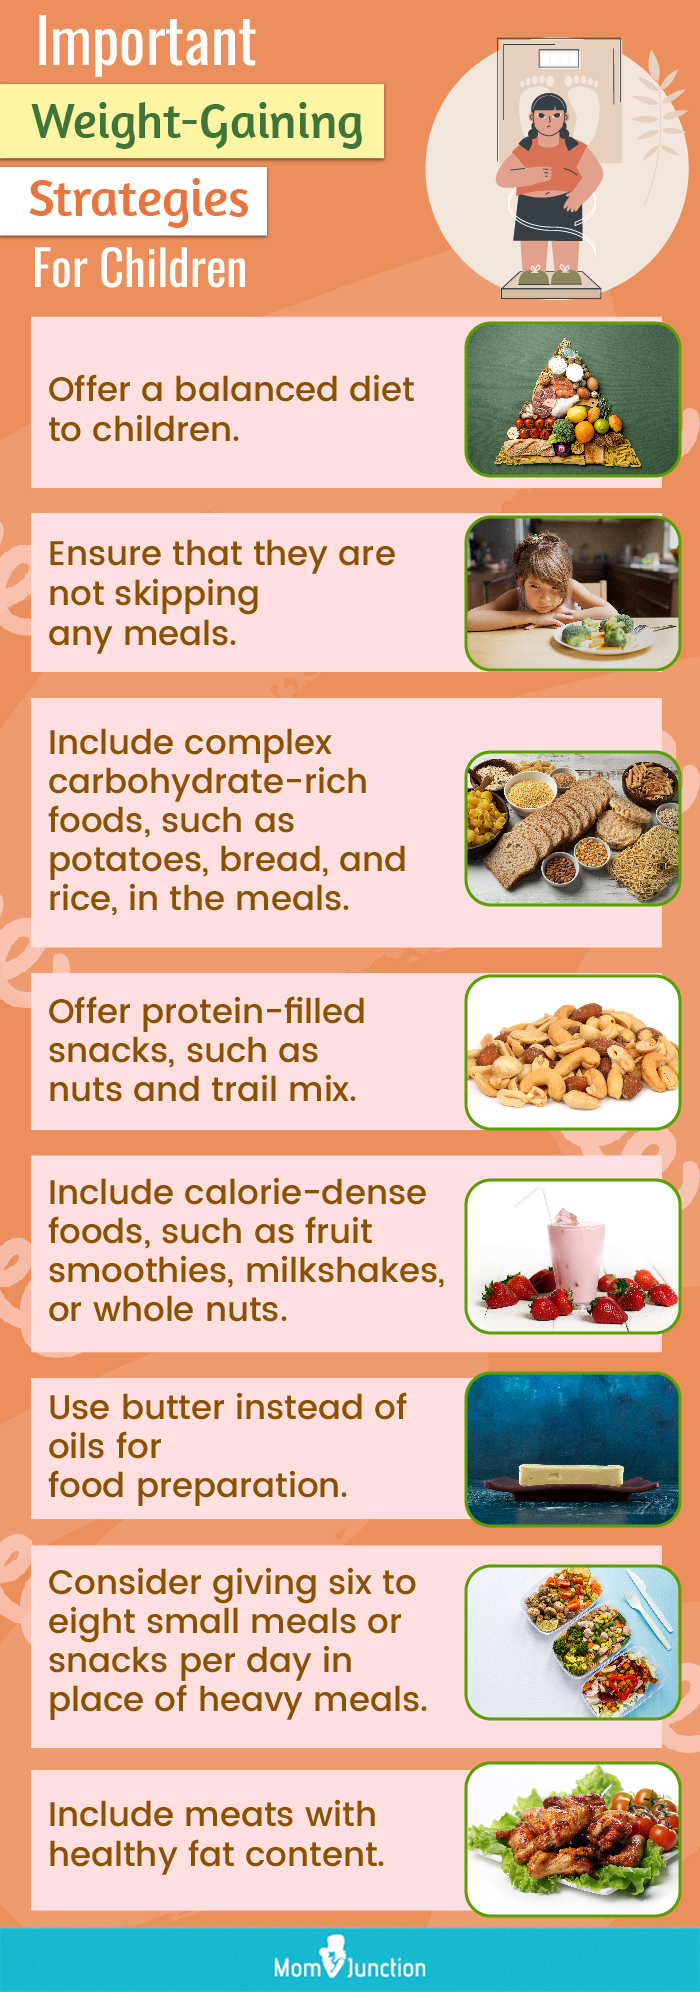 important weight gaining strategies for children (infographic)